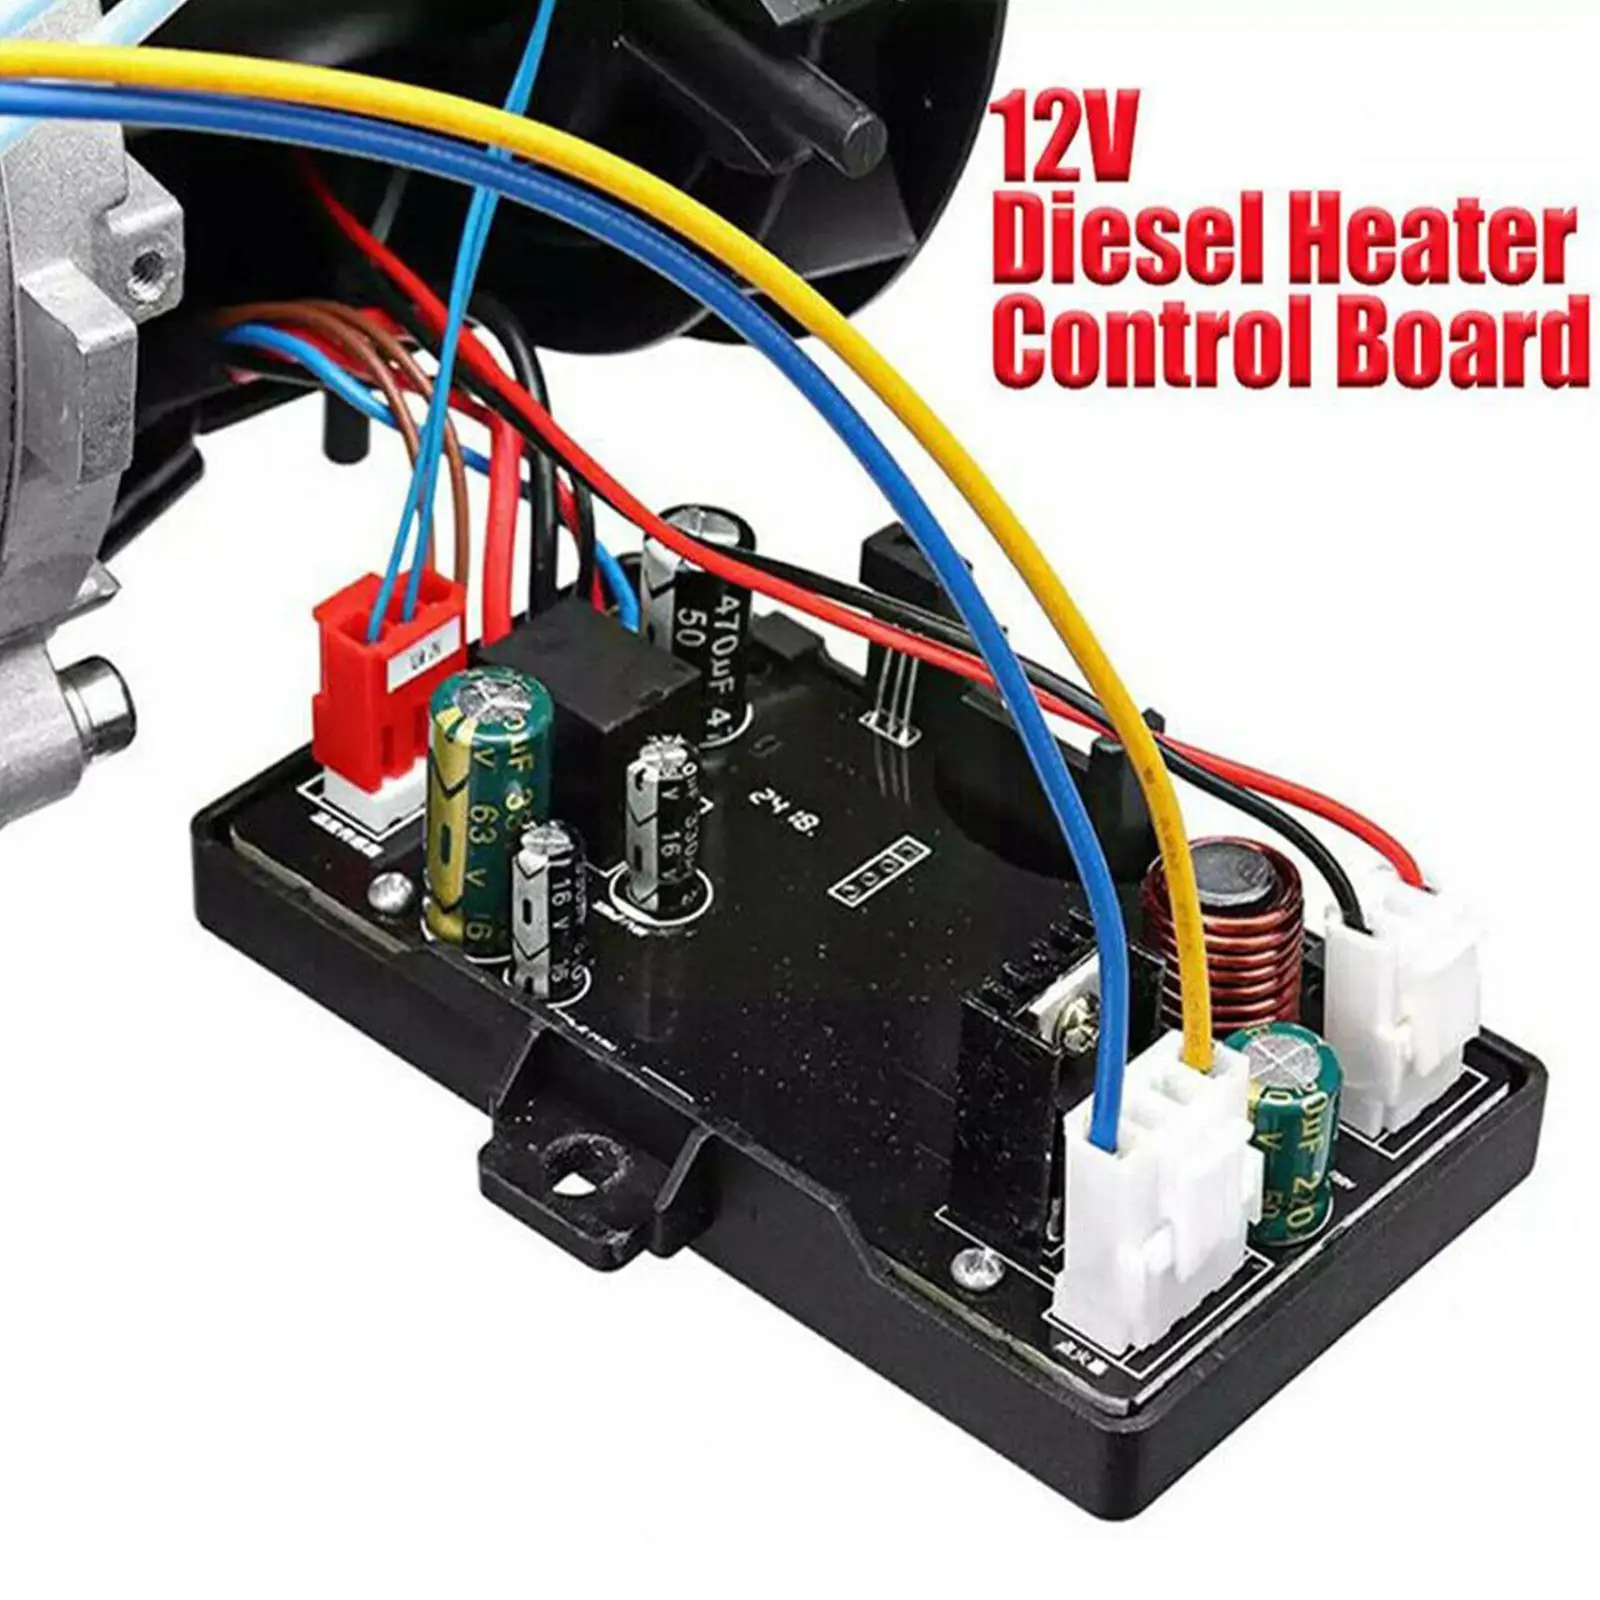 12V 5KW Circuit Board Main Motherboard Controller For Air Parking Heater Air Diesels Heater Car Motherboard Controller Y6T0